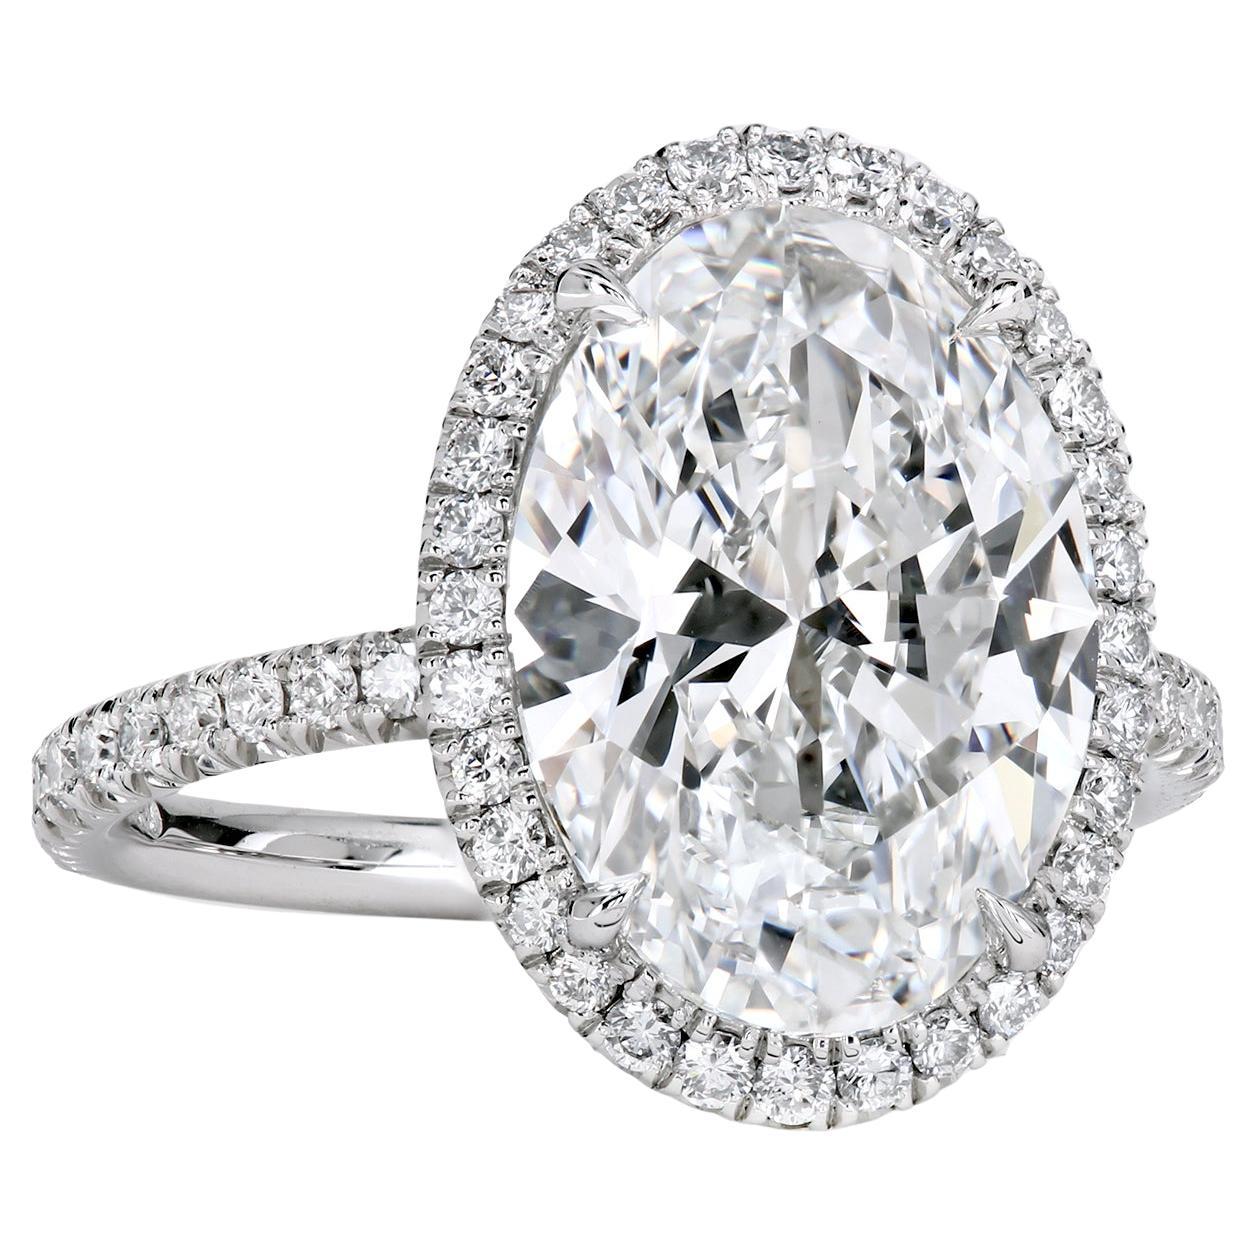 Leon Mege platinum halo ring with 3.01 ct oval diamond. For Sale